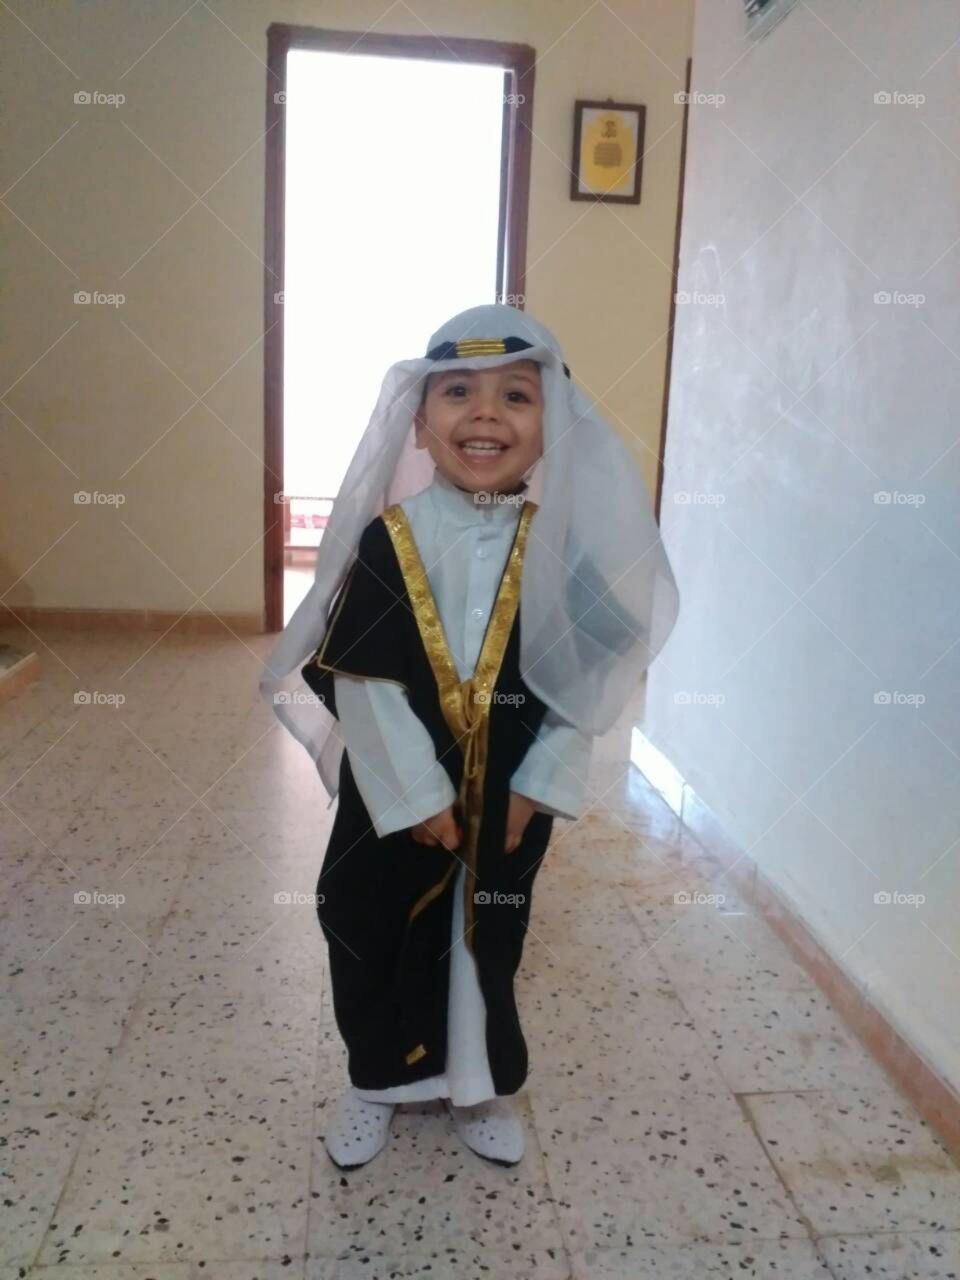 My nephew in the ceremony of the circumcision of his